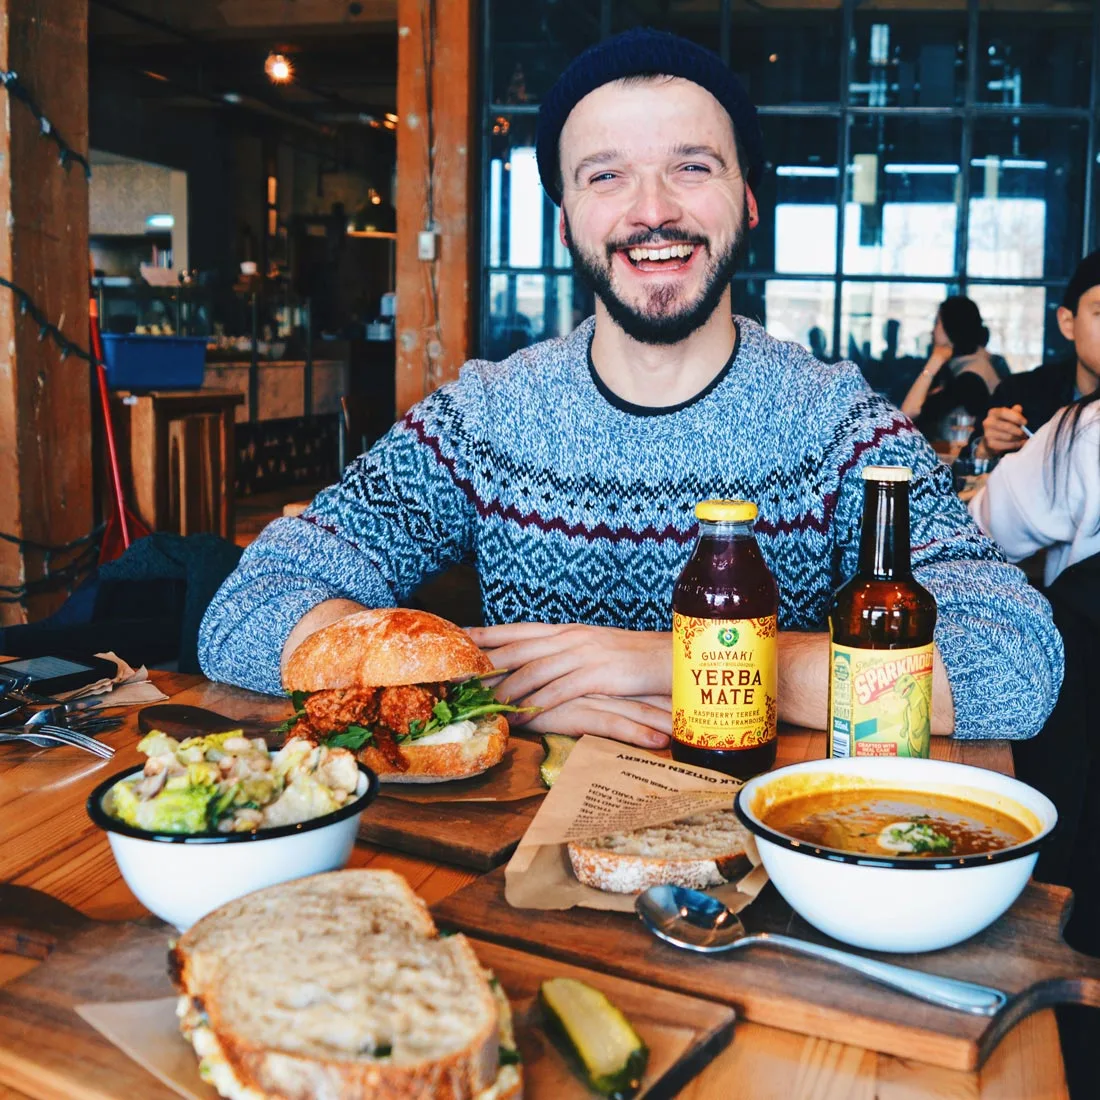 Karl is happy about his breakfast & Coffee at Simmons building in Calgary | Winter Road Trip Alberta Highlights Canadian Rocky Mountains © Coupleofmen.com